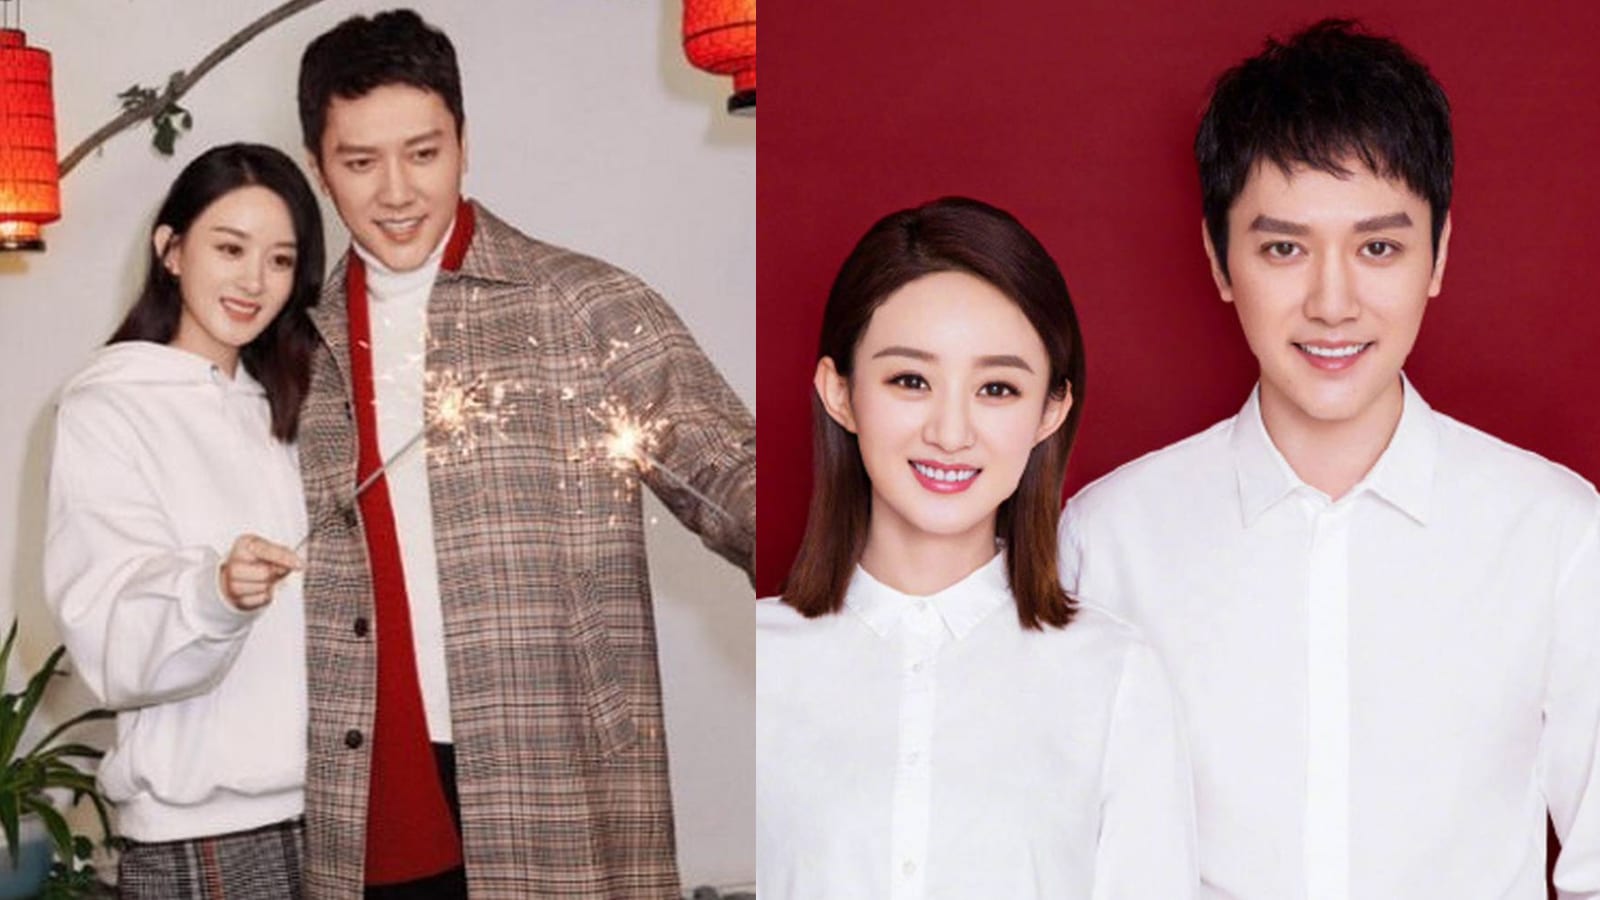 Zhao Liying & Feng Shaofeng’s Divorce Reportedly Caused By His Mum Who Wanted The Actress To Quit Showbiz & Have More Kids